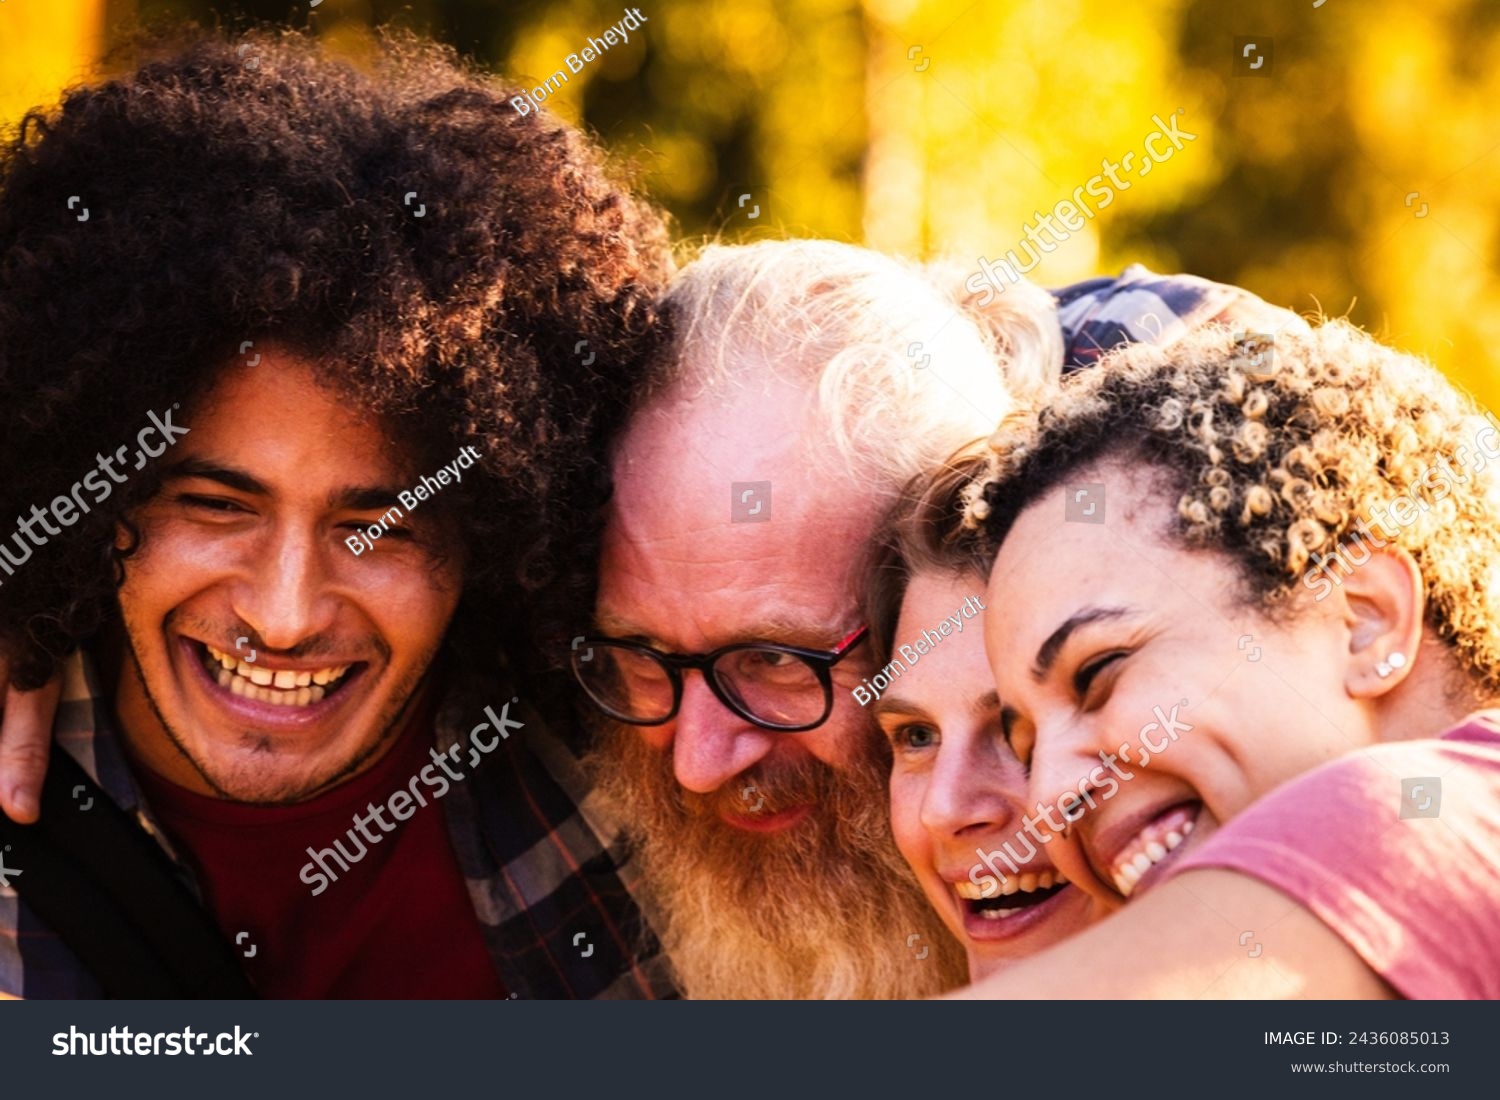 The image captures an up-close, joyful moment among a group of diverse friends. A young man with curly hair is seen laughing alongside an older man with a white beard and glasses, and a young woman #2436085013